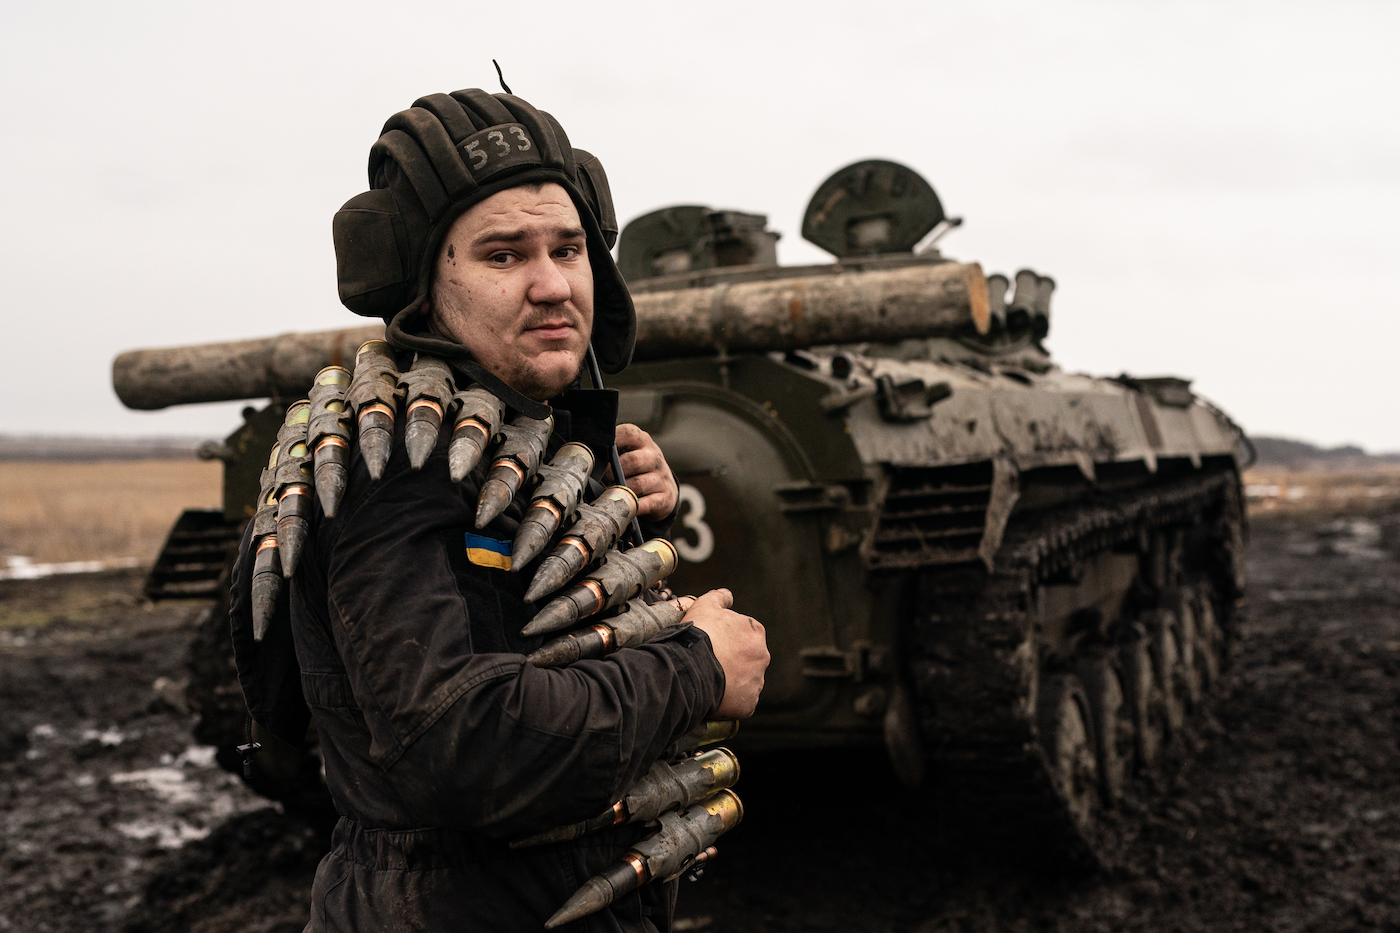 A Ukrainian serviceman with the 30th Mechanized Brigade is seen carrying 30mm ammunition while training with a BMP-2 in Donetsk Region, Ukraine on February 10, 2022. Wolfgang Schwan - Anadolu Agency